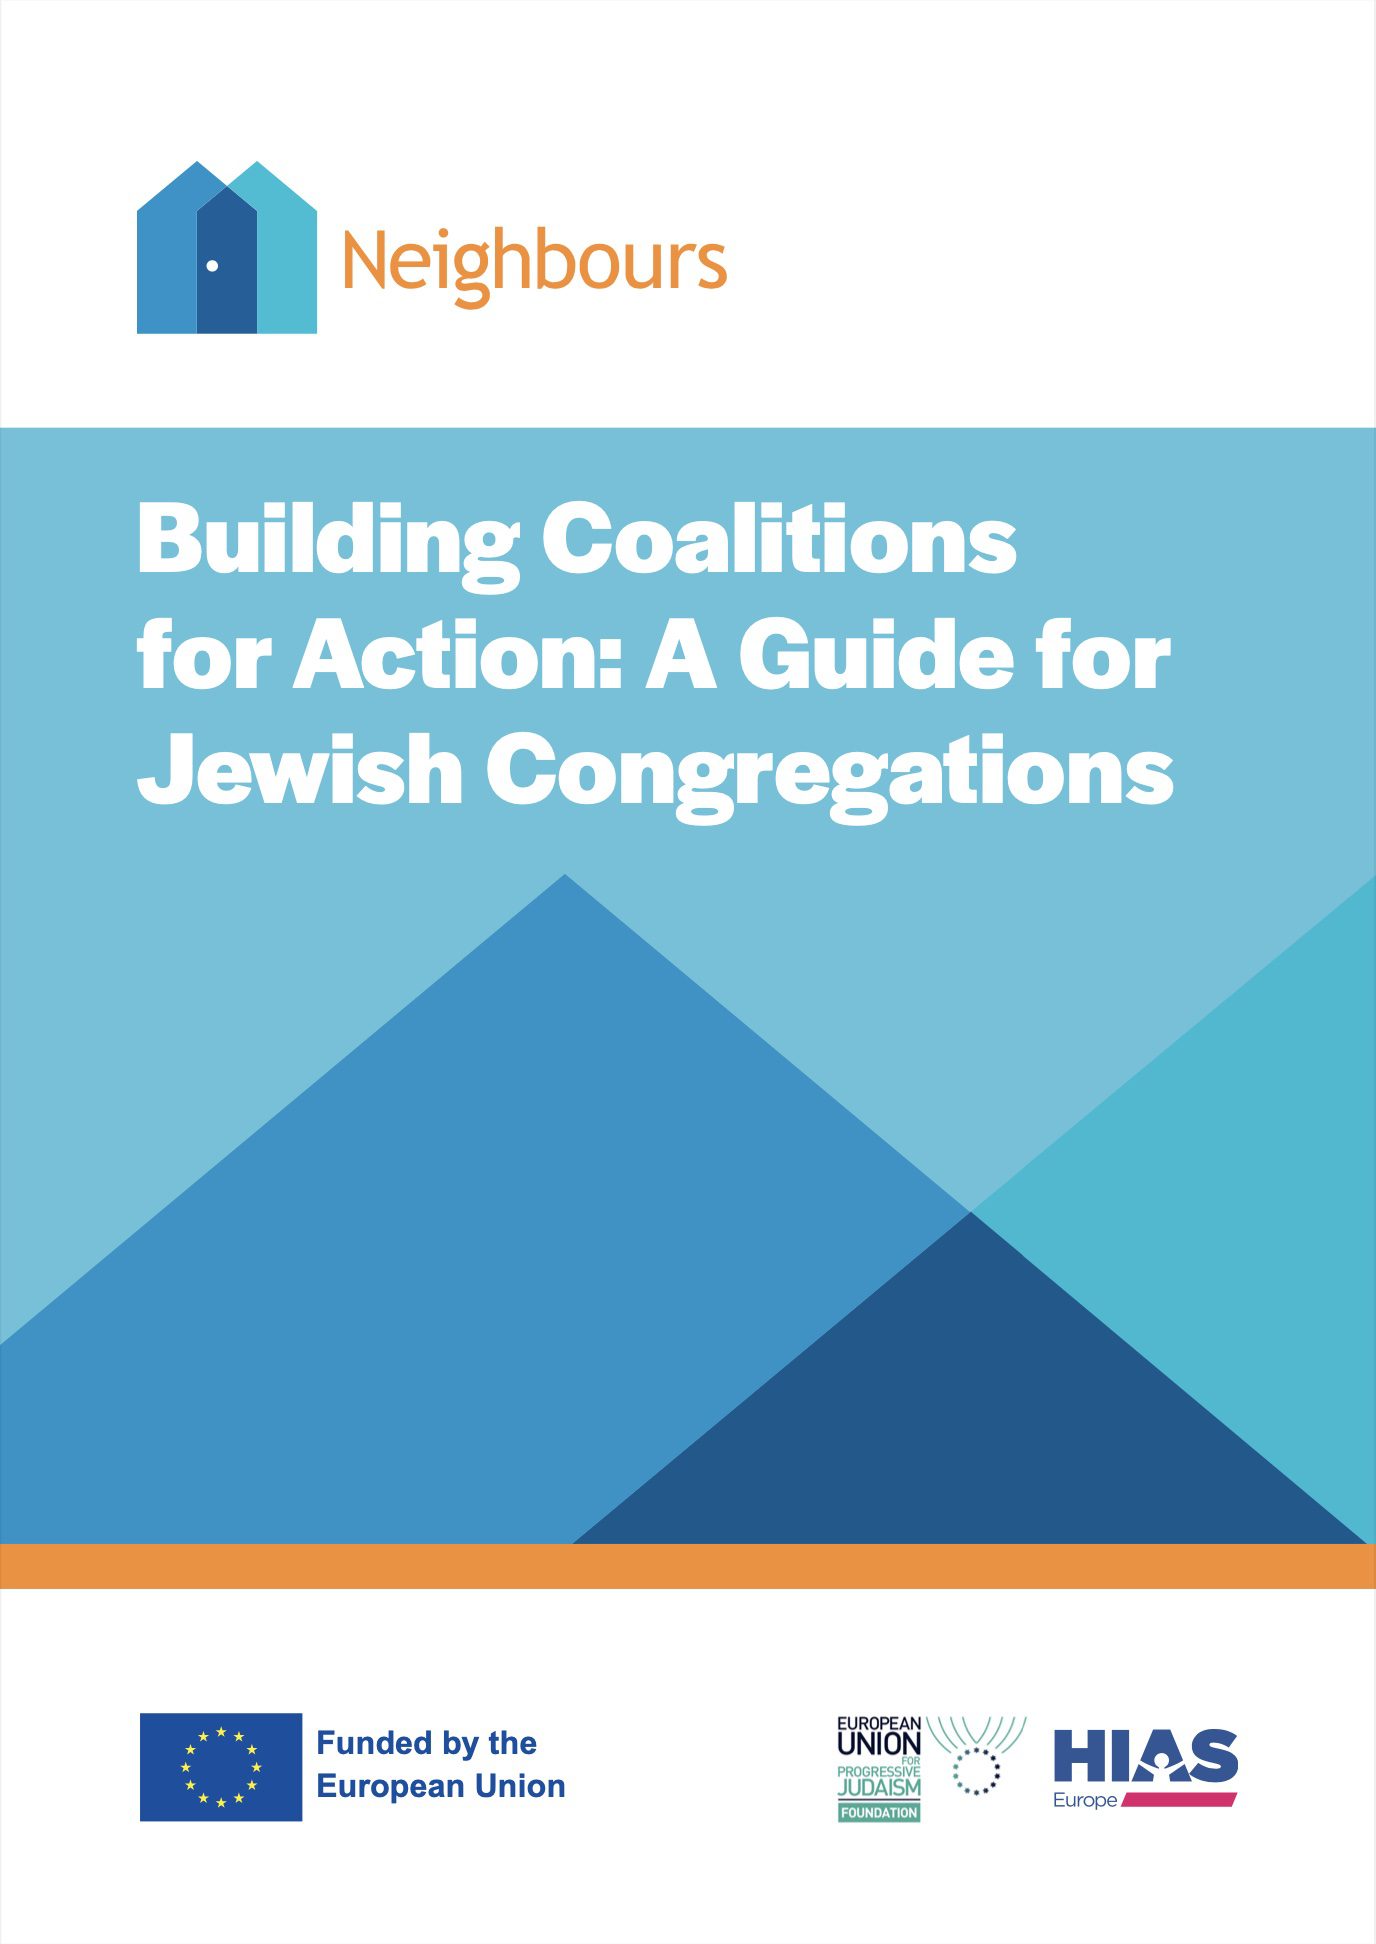 Cover page for the Building Coaltions for Action PDF.